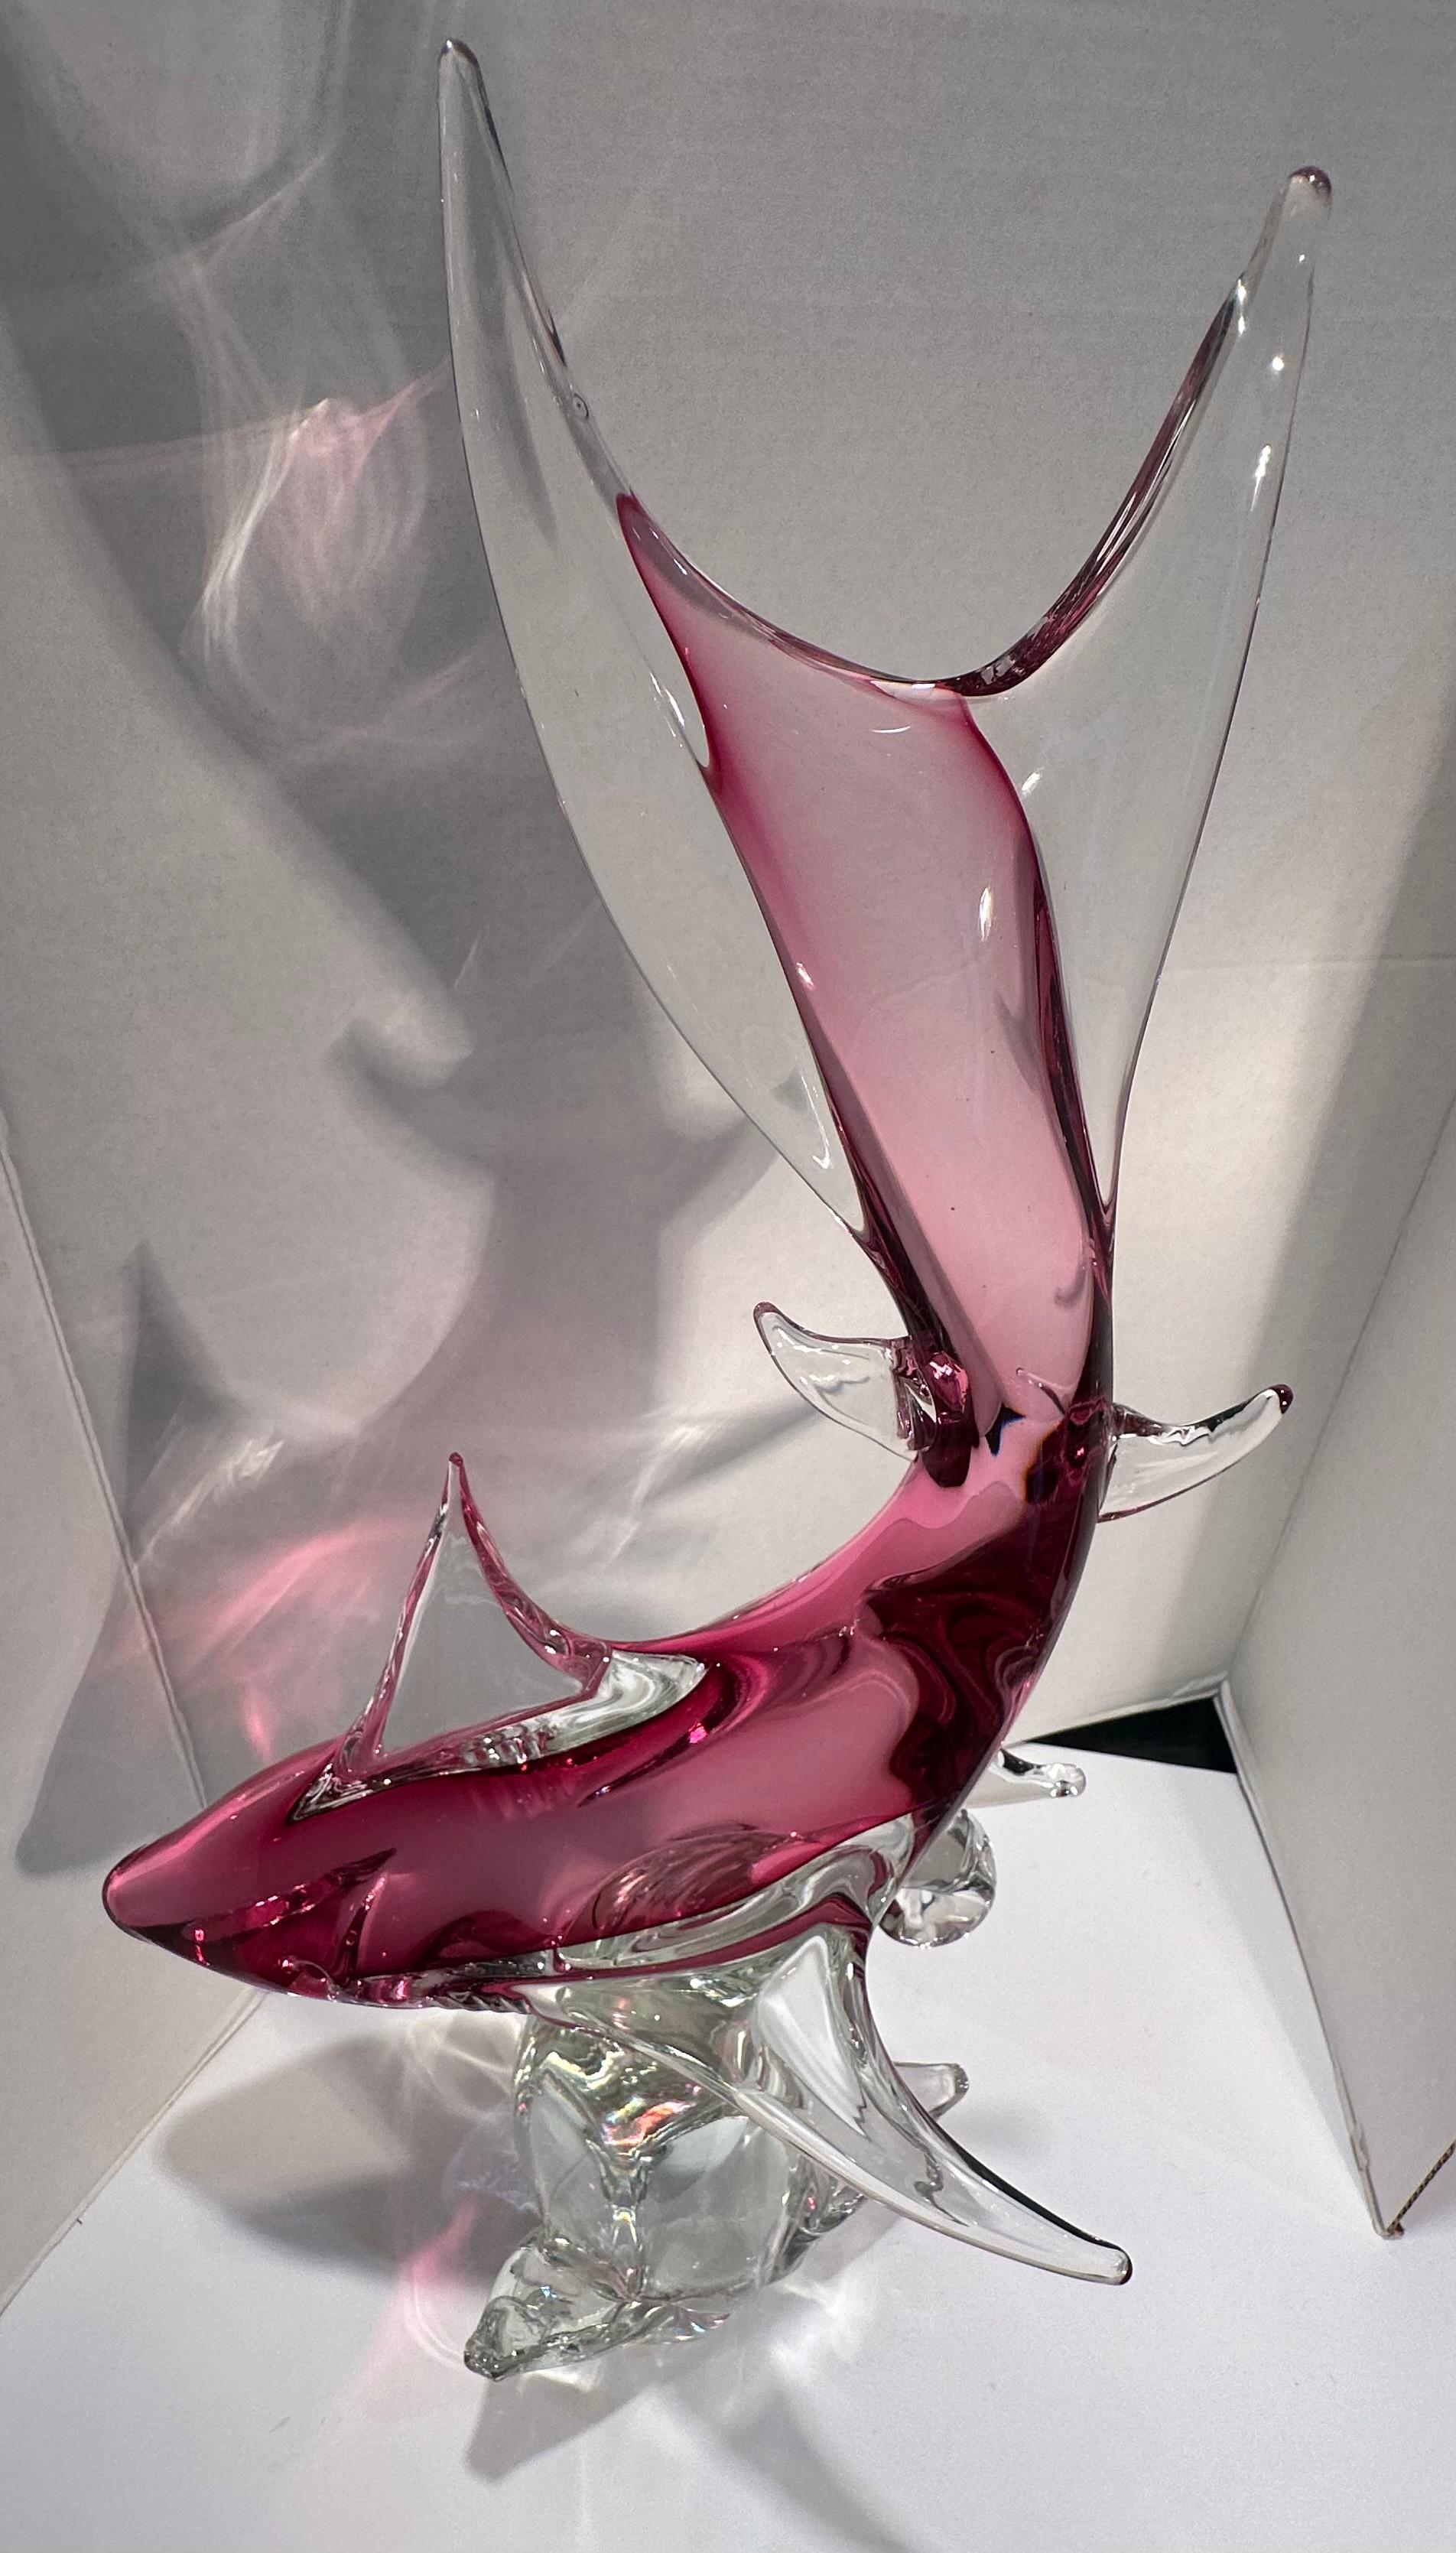 Modern Impressive Over Two Feet Tall Murano Art Glass Hot Pink Shark on a Wave Figurine For Sale